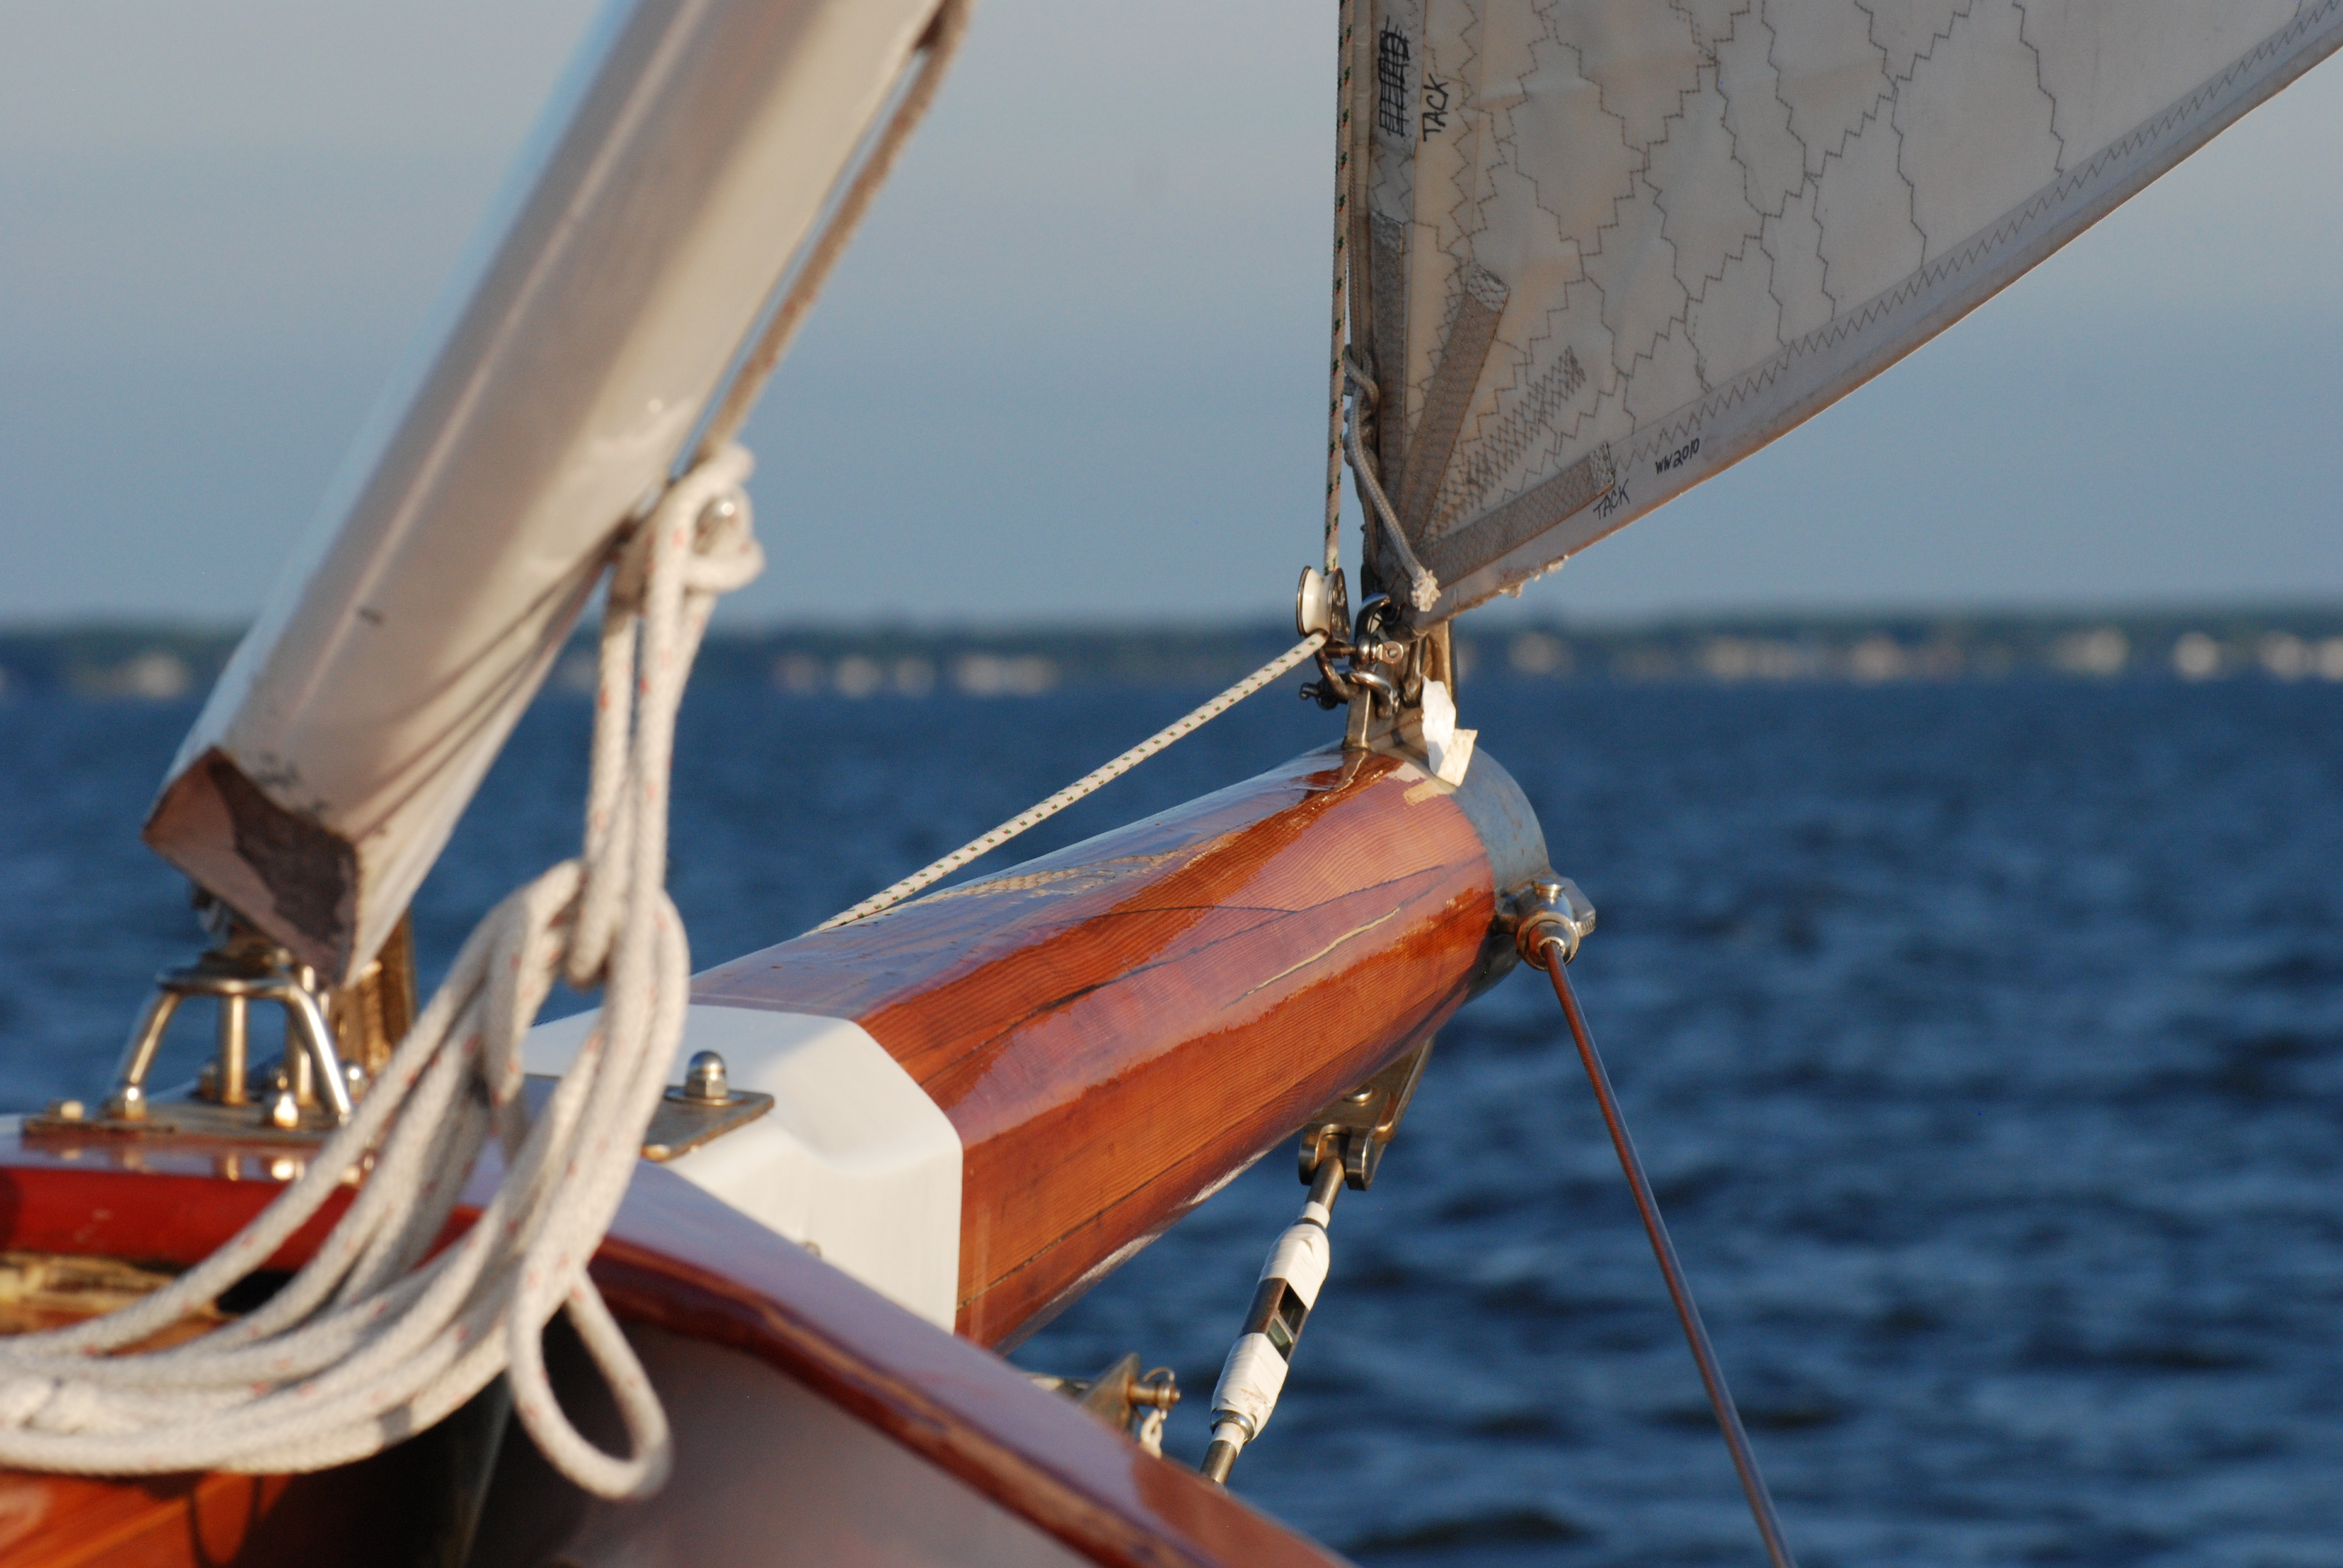 The Bow of the Schooner with blue waters ahead